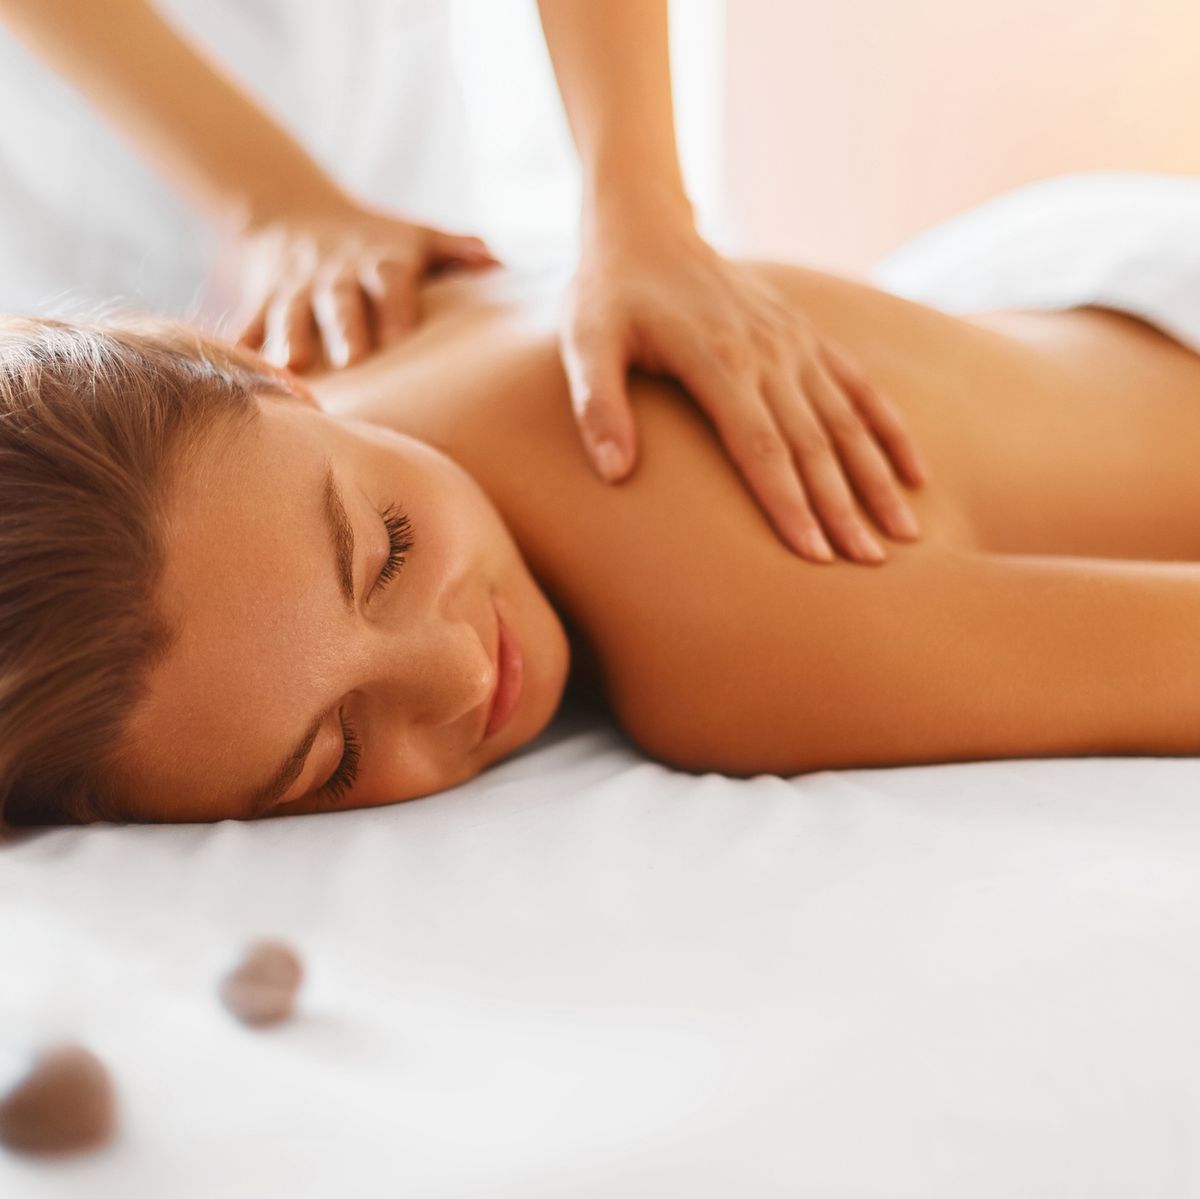 How to Do a Self Massage at Home, Plus the Best Self-Massage Tools